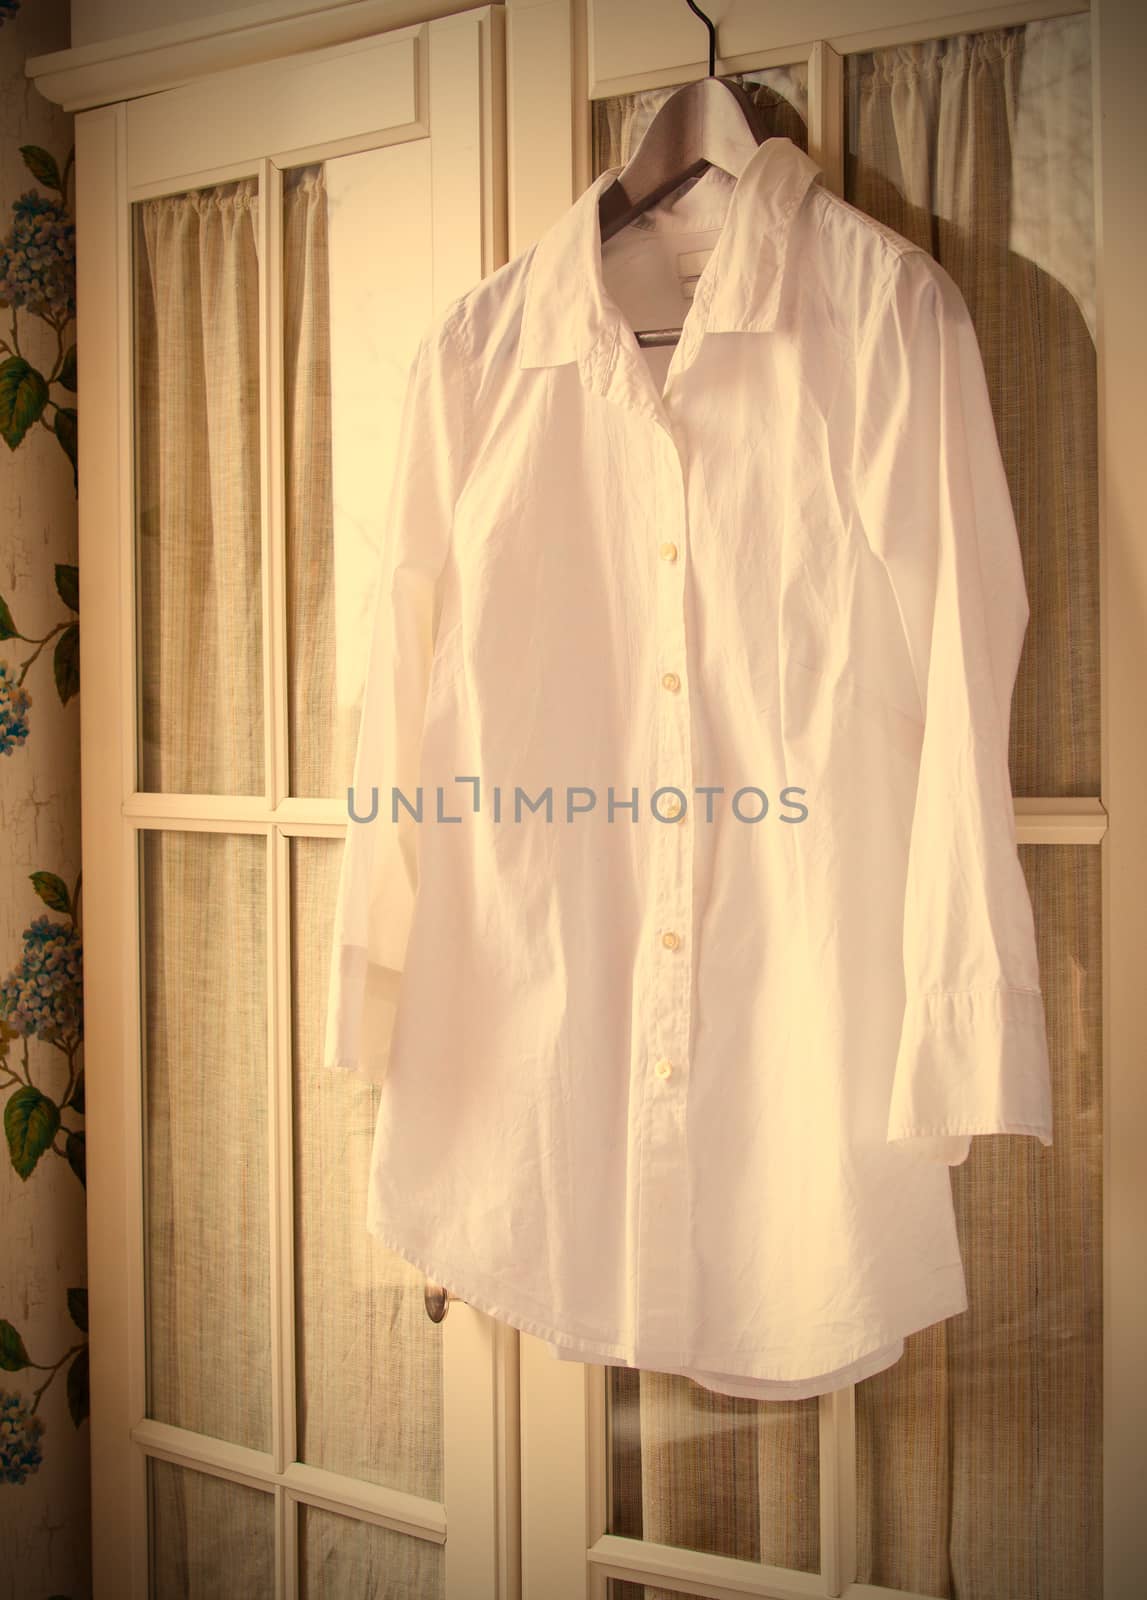 white cotton shirt on a hanger on the door wardrobes. instagram, image style